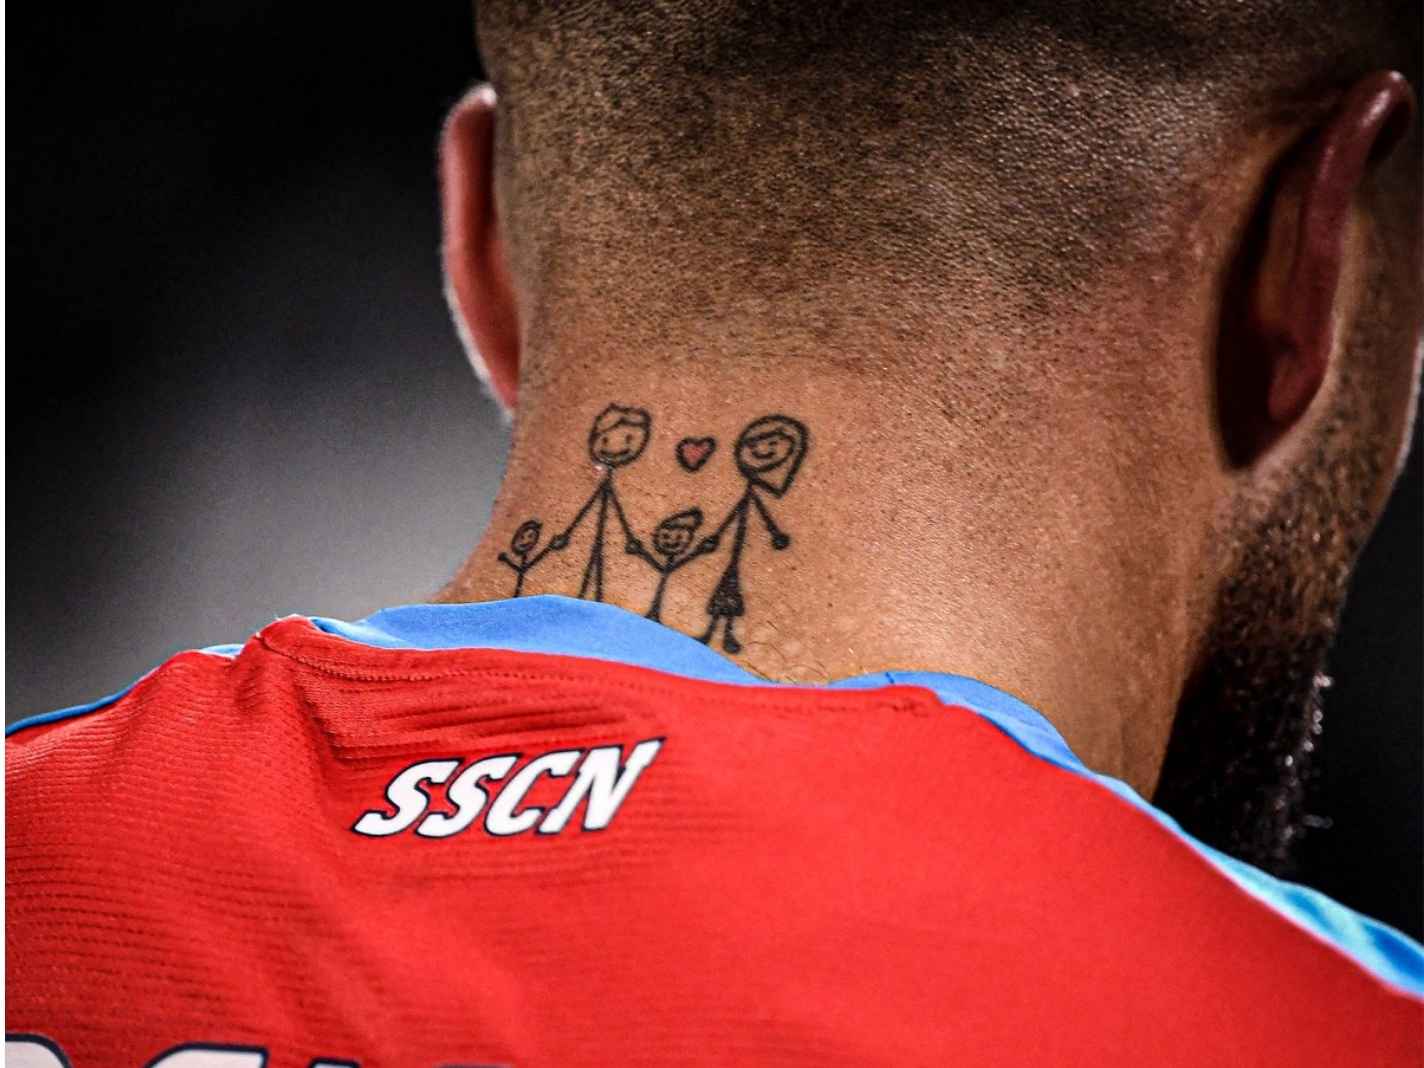 The stick figure family tattoo on Lorenzo Insigne’s neck has been updated